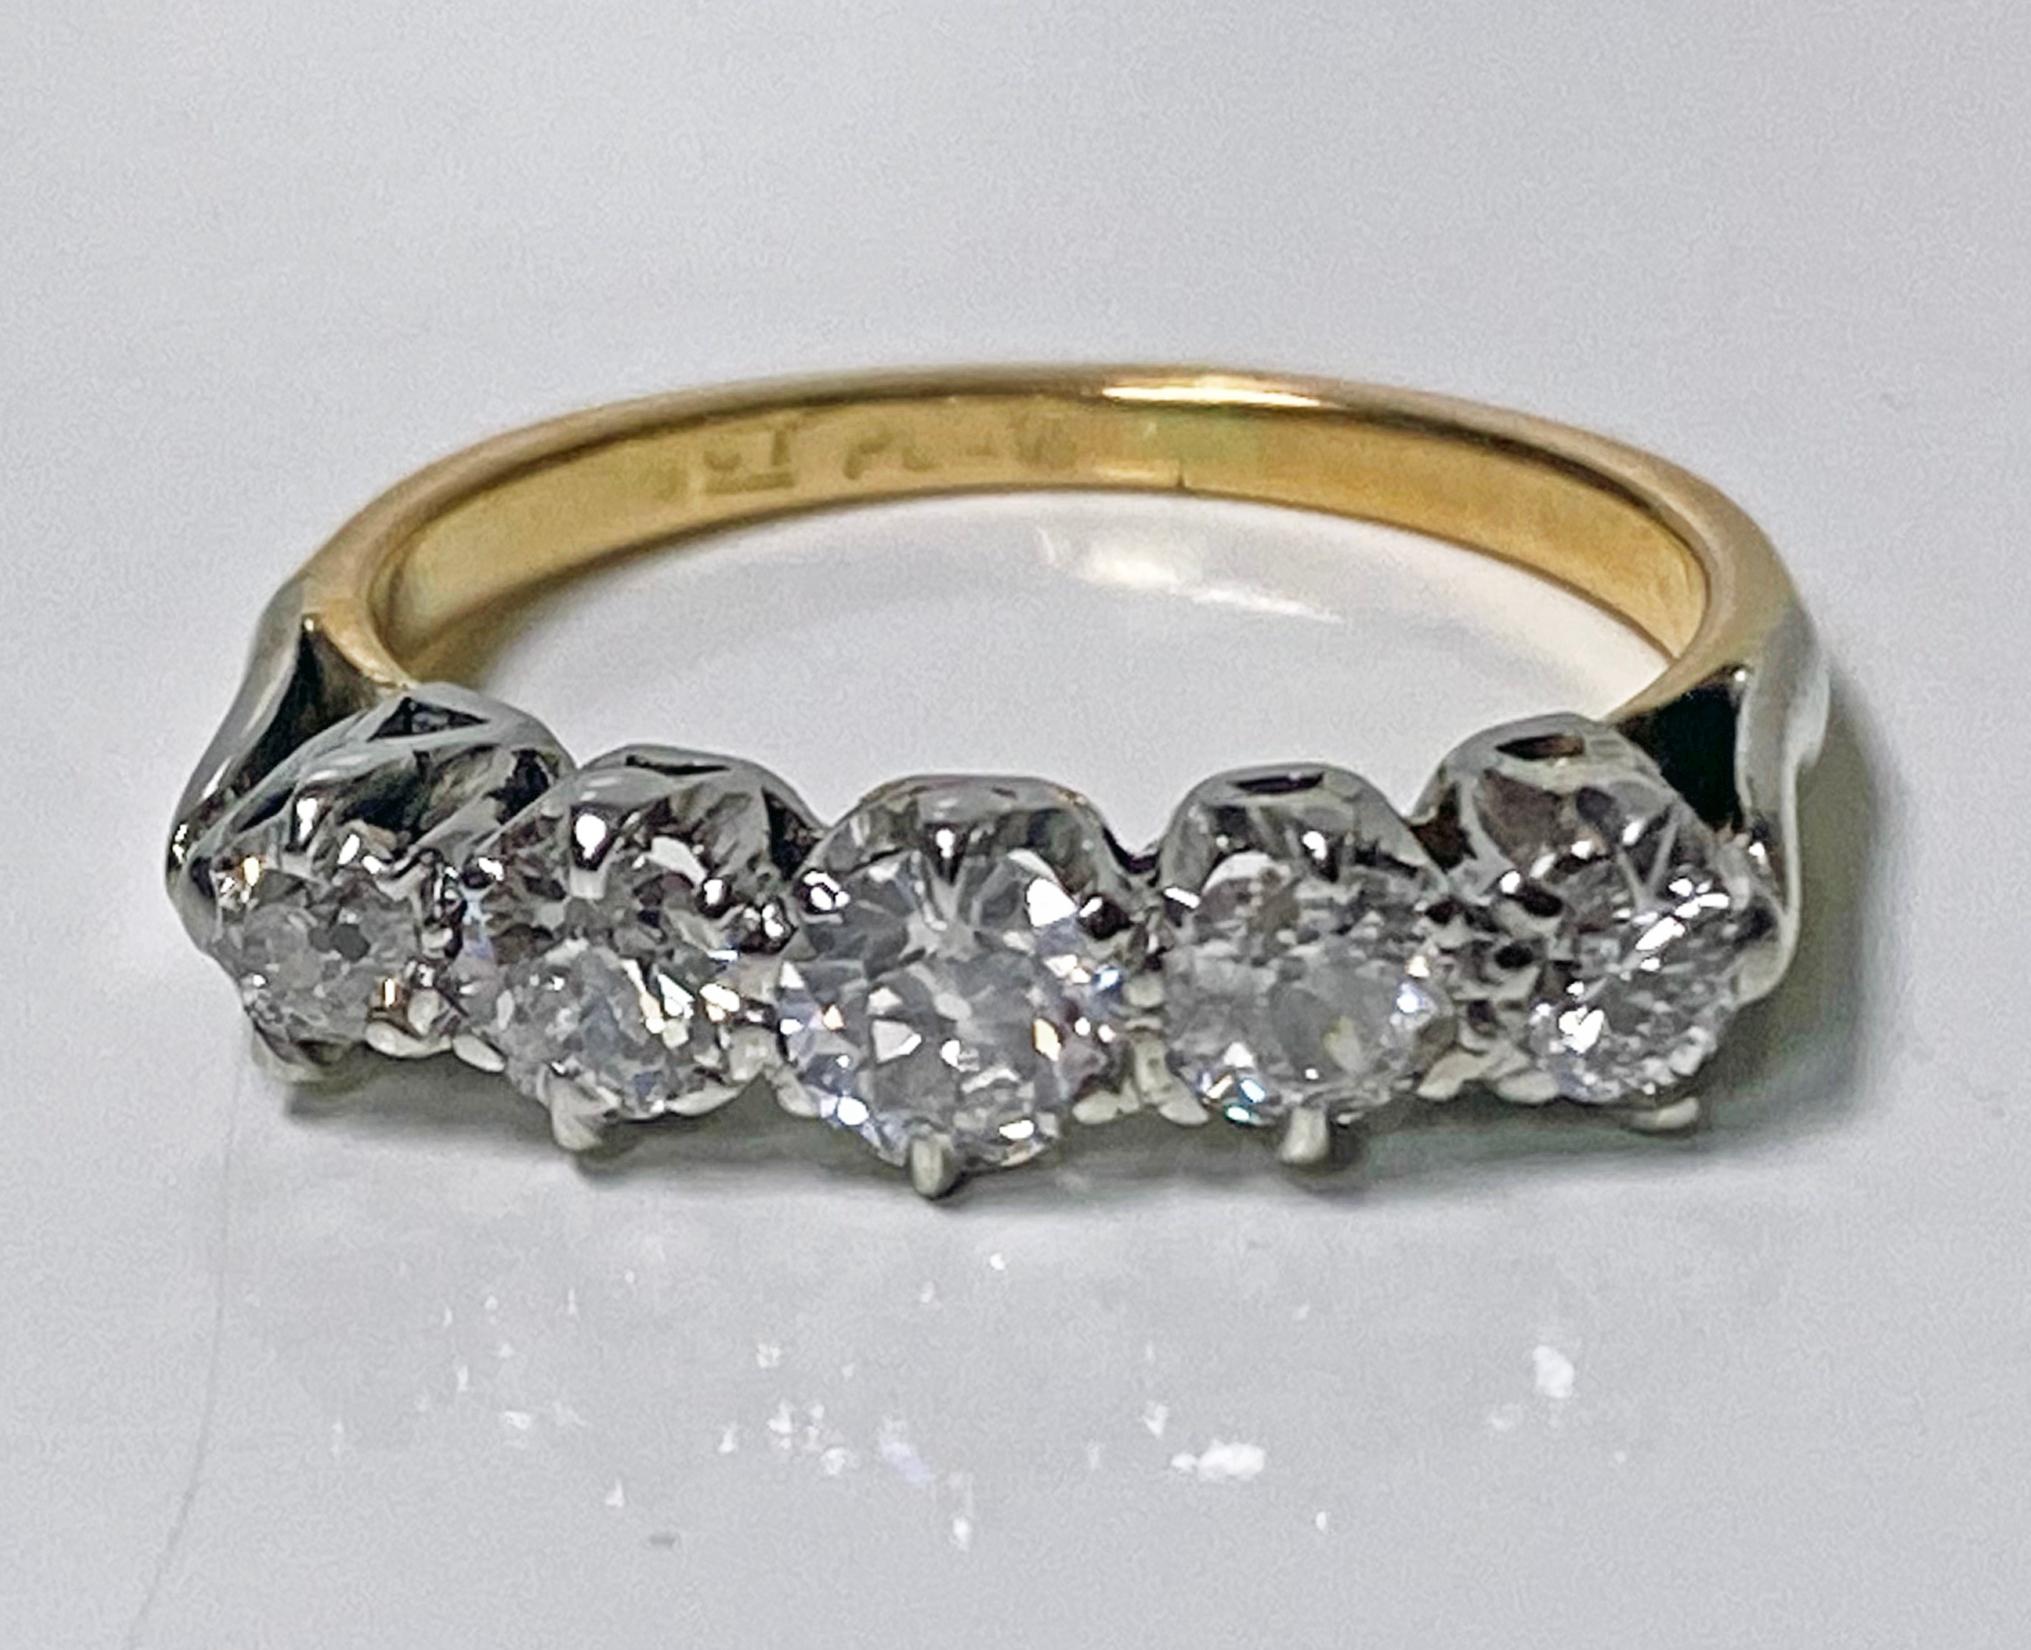 Antique 15K and Platinum (top) Diamond Ring, C.1920. The five stone diamond Ring set with old european cut diamonds average I1 clarity, average J color, plain basket setting and shank. Centre stone approximately 0.25 ct. Total Item Weight: